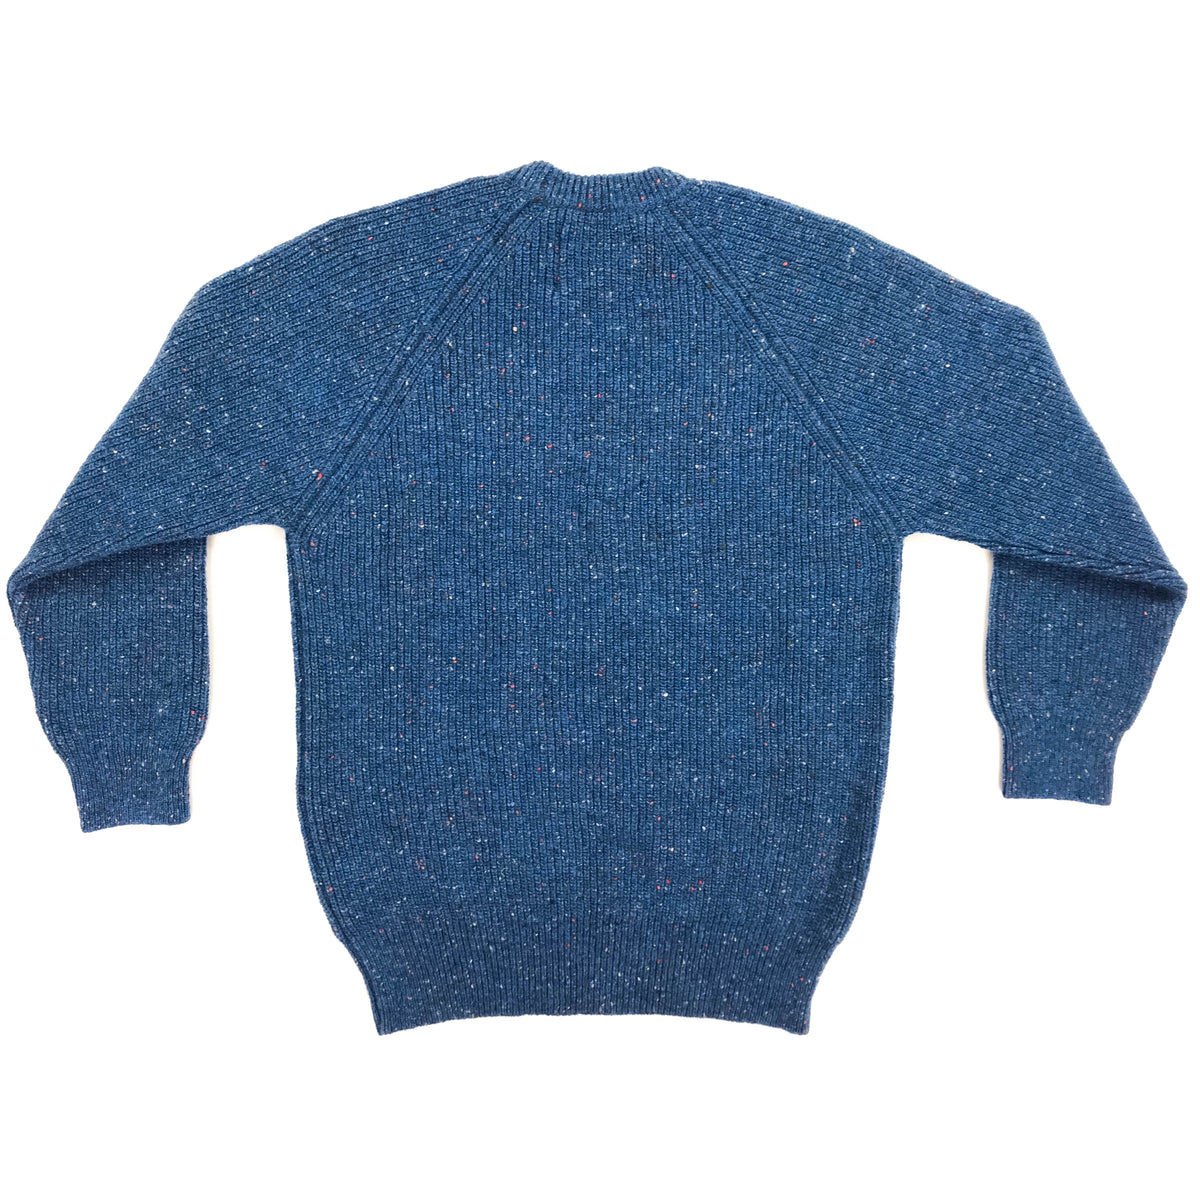 Sky Mohair/Merino Wool Tweed from Donegal, Ireland, knit and sewn in Q –  Left Field NYC